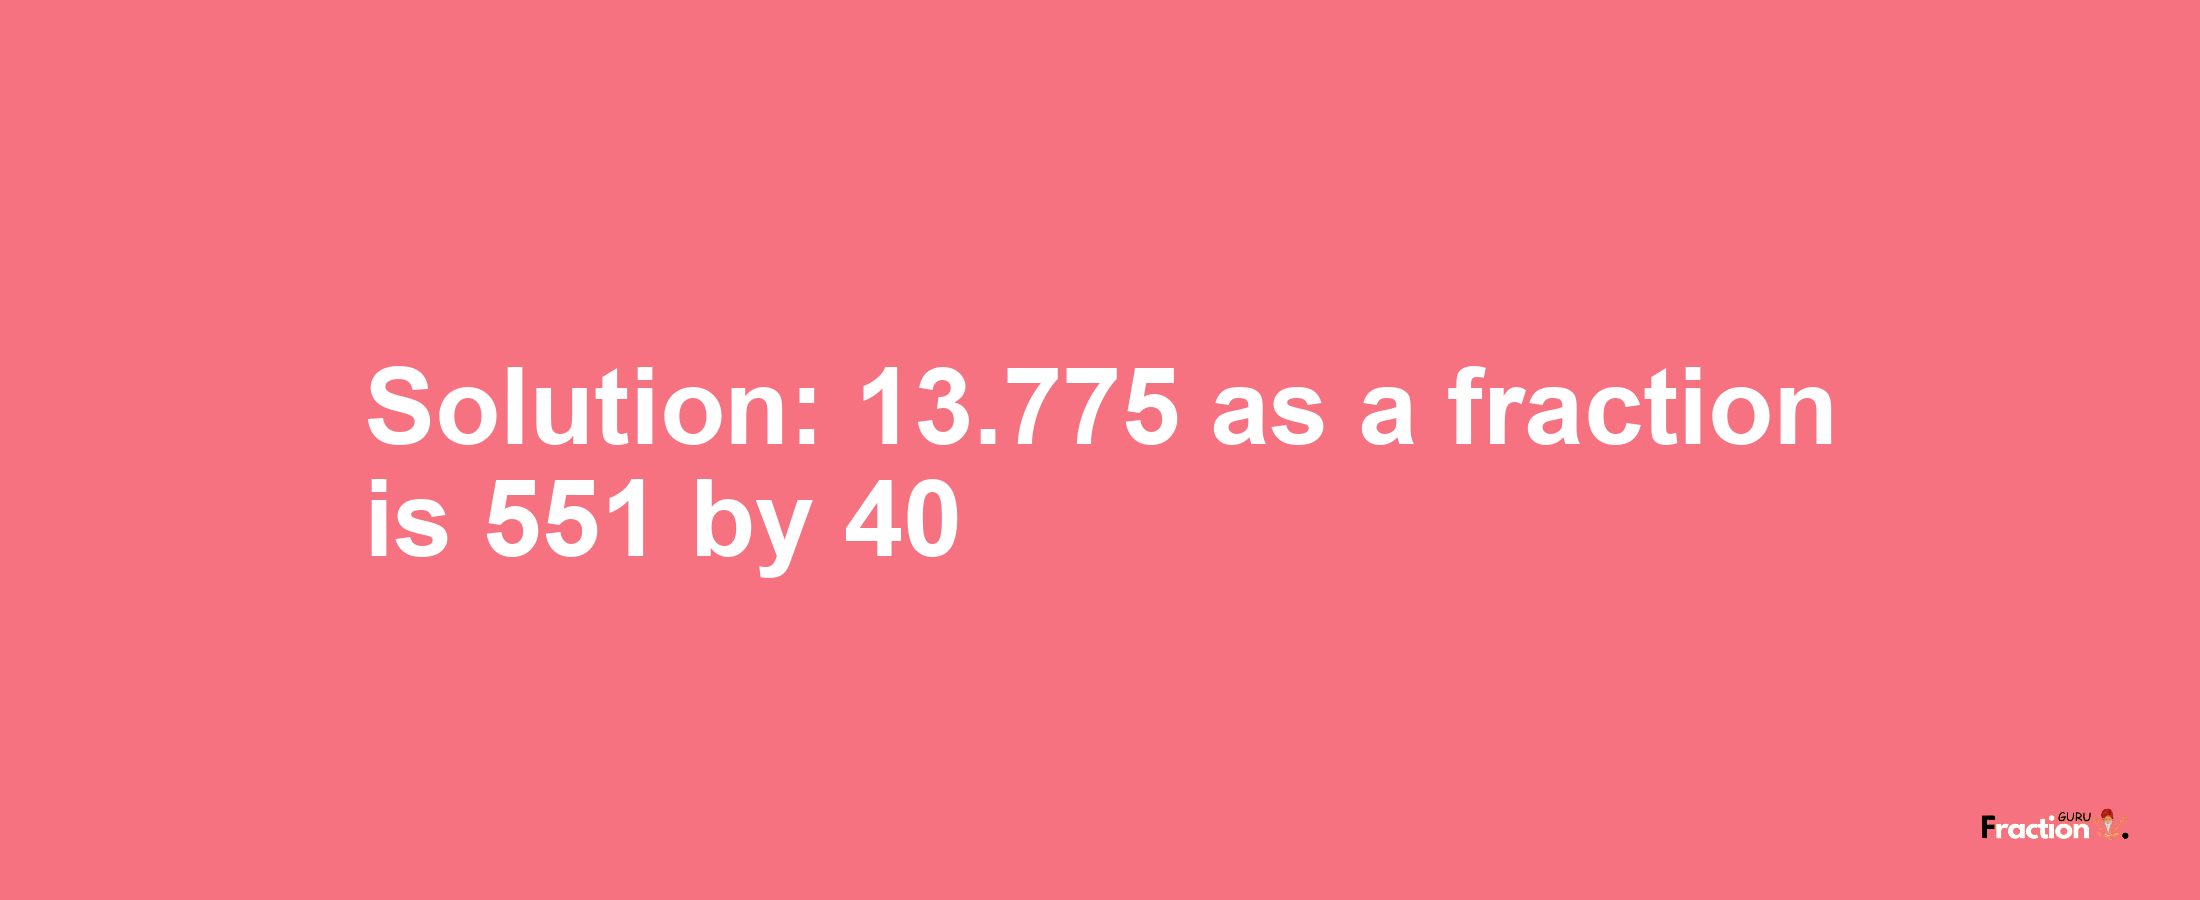 Solution:13.775 as a fraction is 551/40